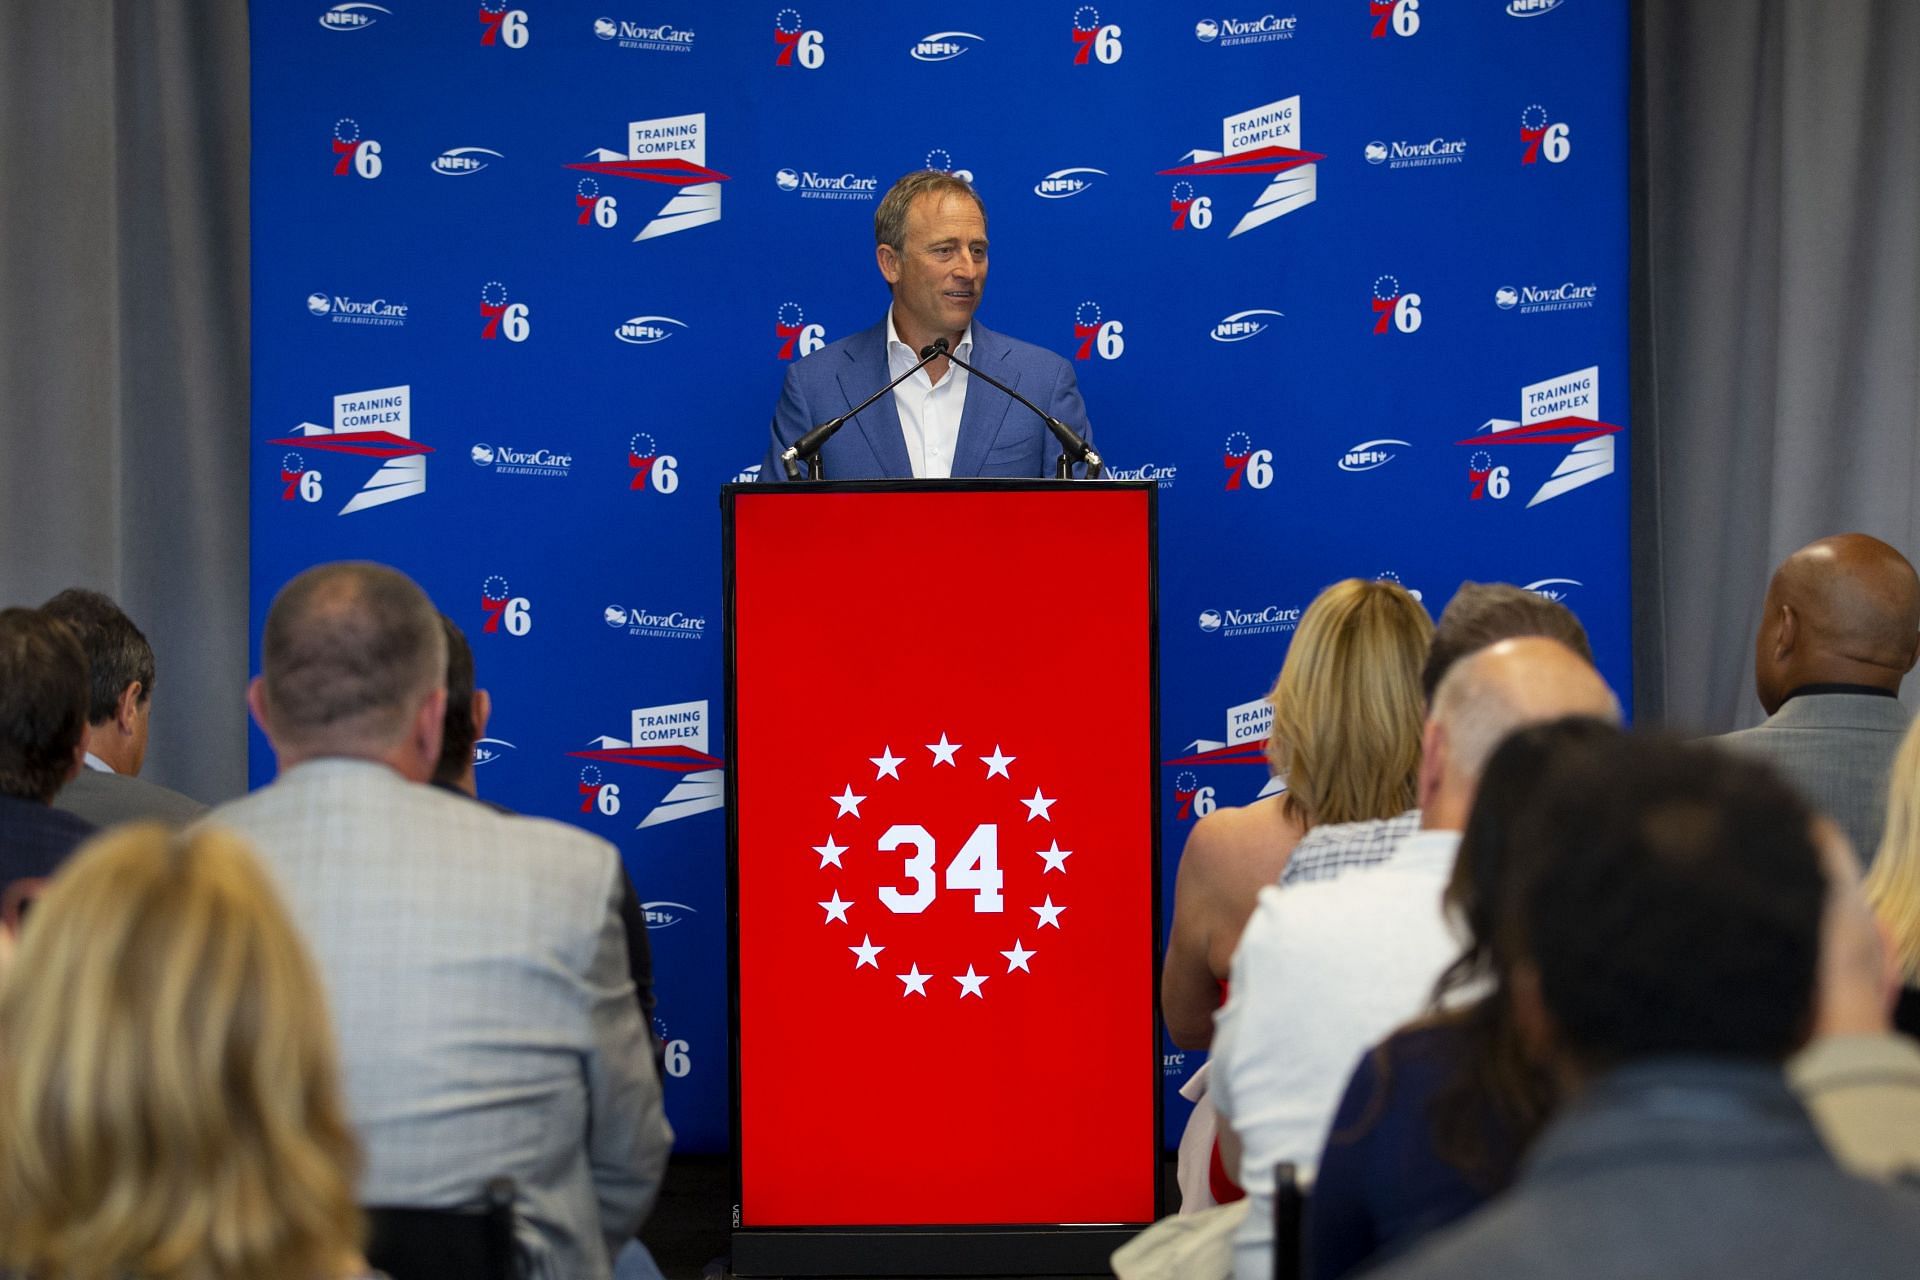 Philadelphia 76ers co-owner Josh Harris wants to purchase an NFL franchise.